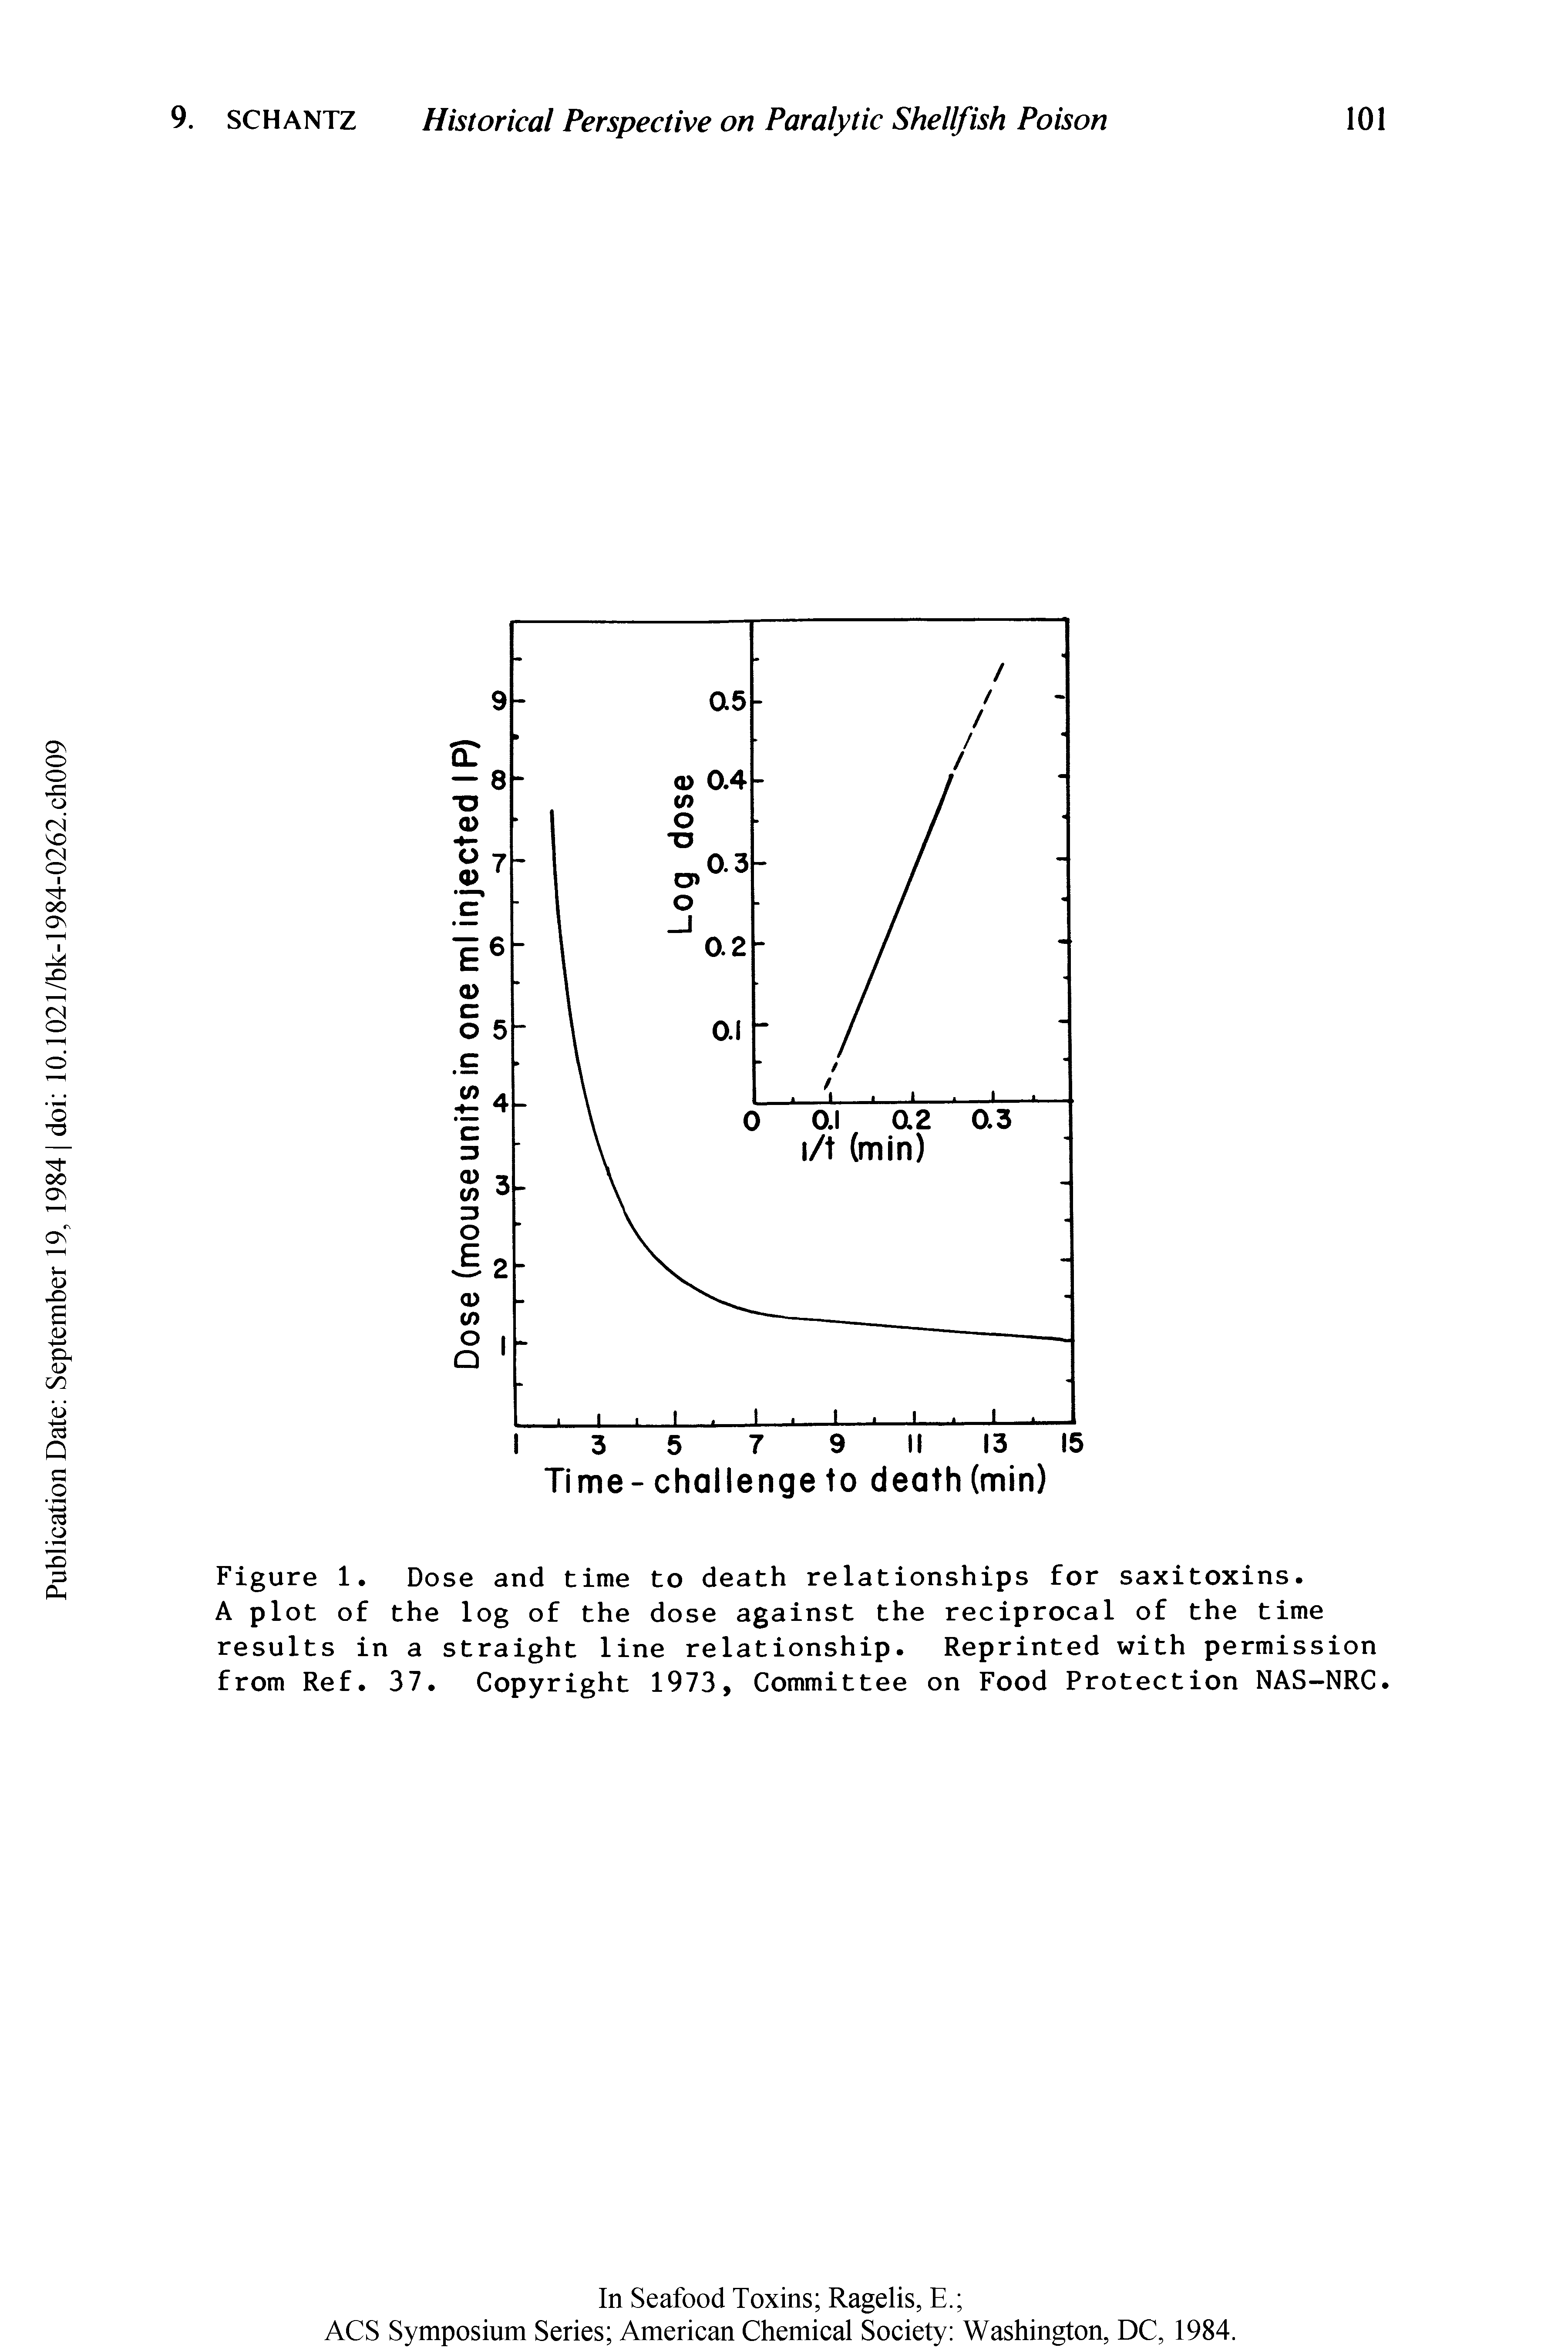 Figure 1. Dose and time to death relationships for saxitoxins.